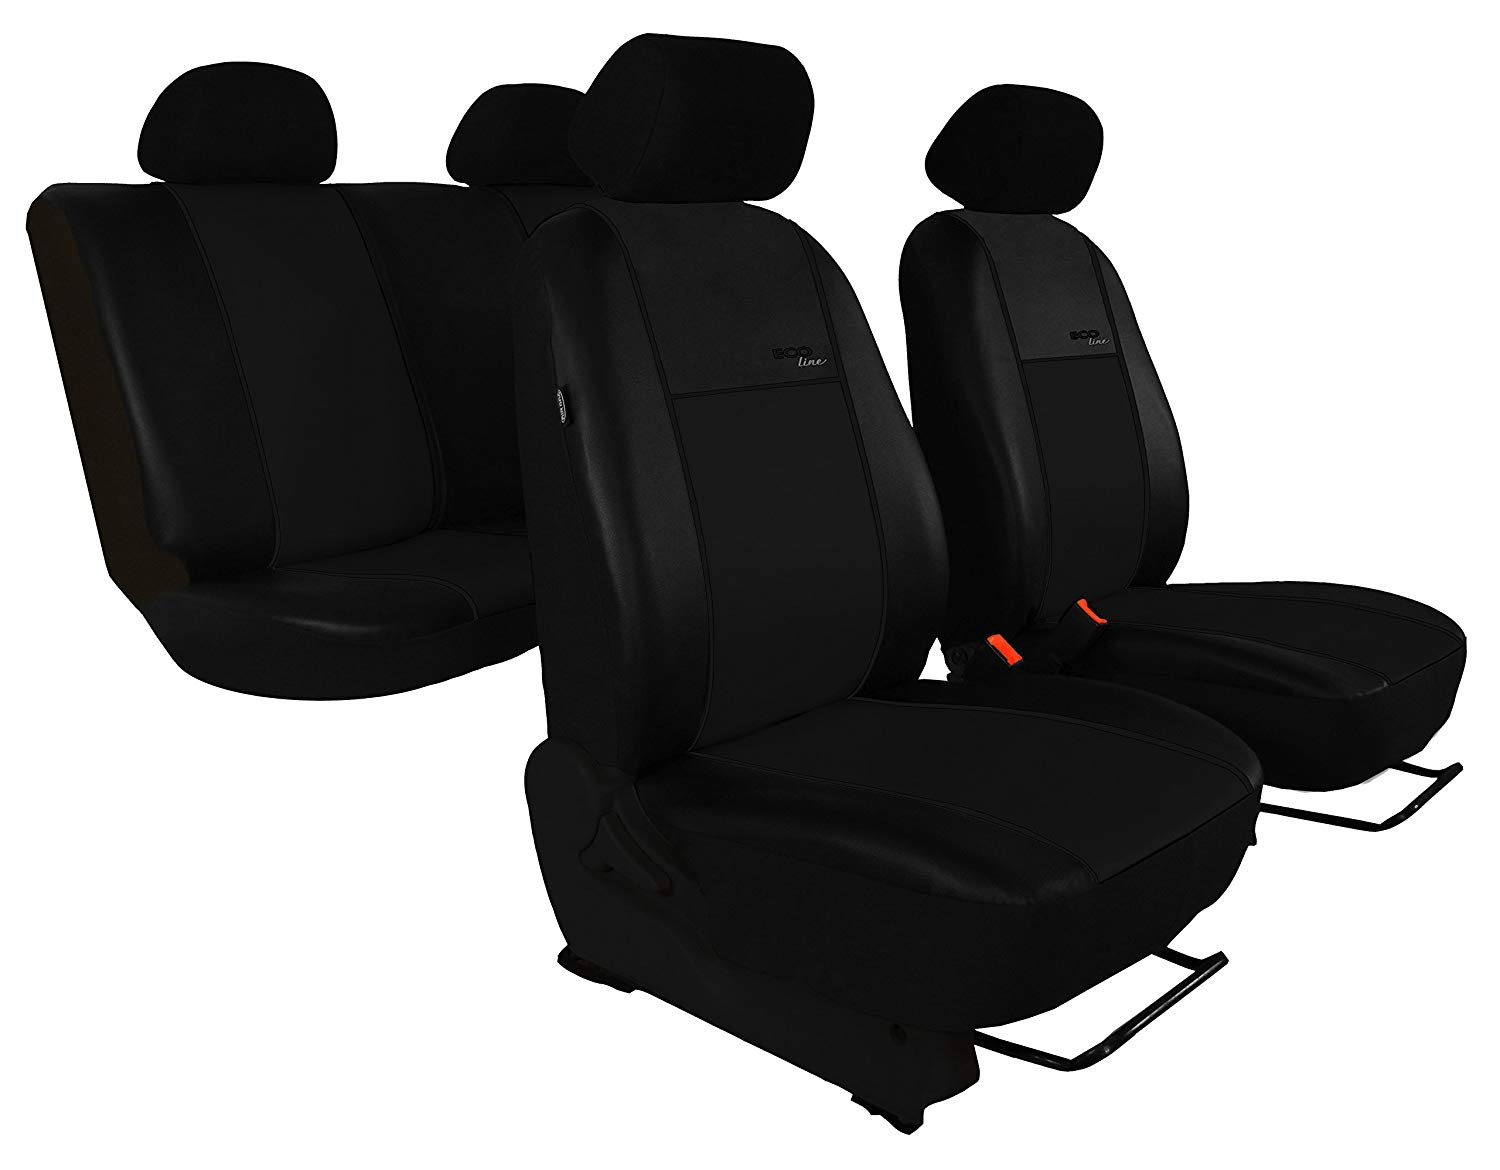 Pok Ter Car Tuning Car Seat Covers Faux Leather Great Quality 80. Design Art Line. It has a black Slat